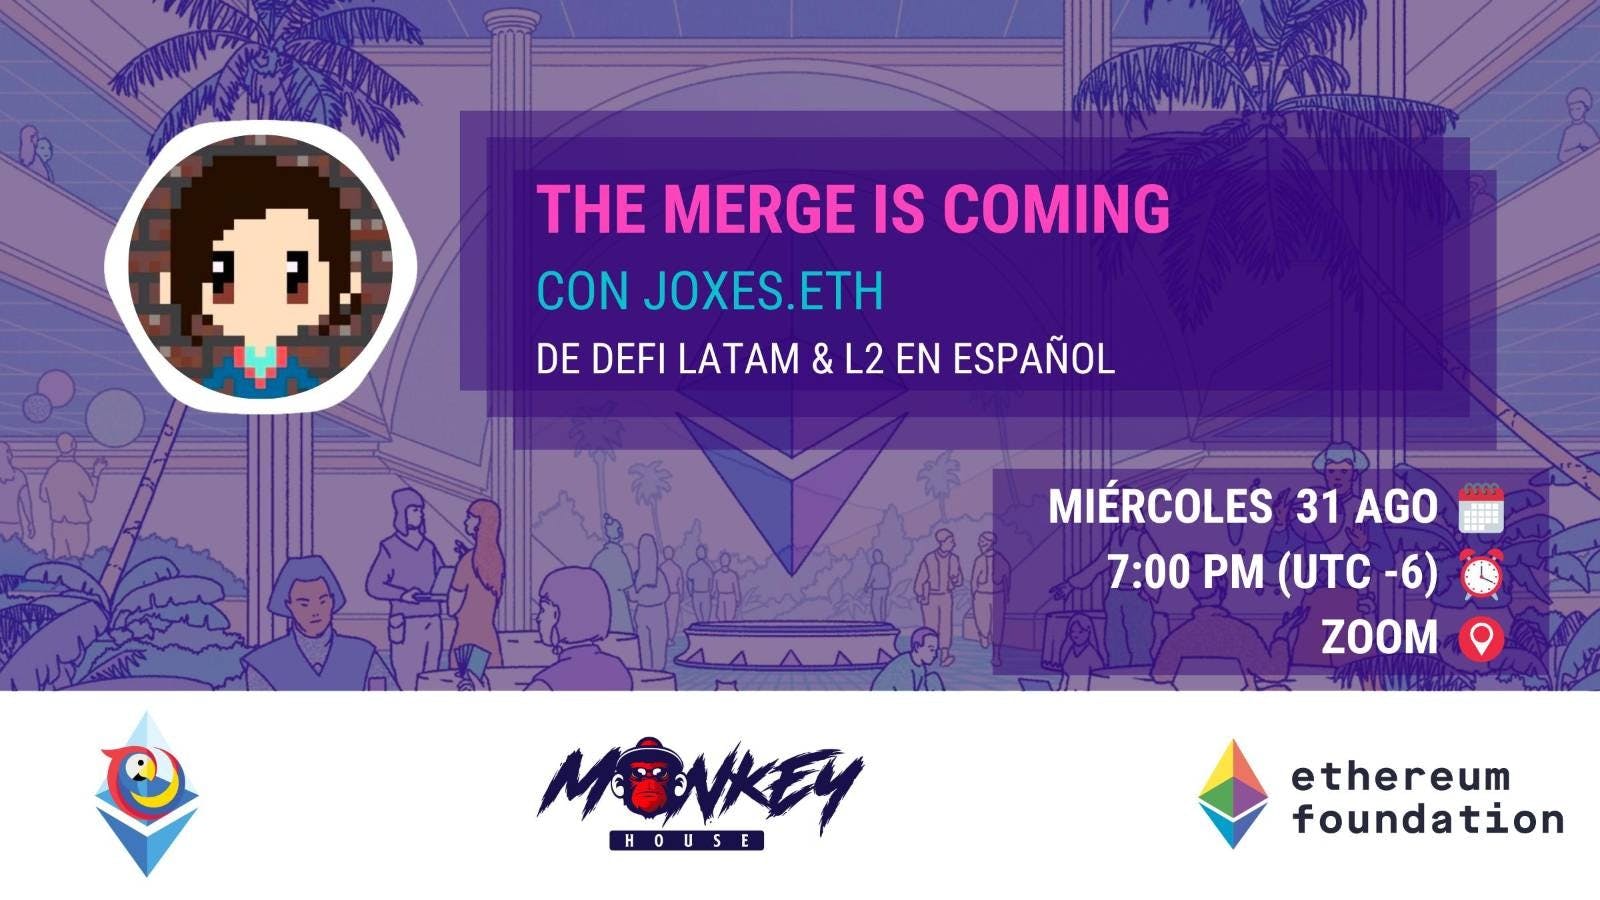 Virtual meetup with Joxes from DeFi Latam and L2 en Español as a guest, he explained to the community everything related to the merge.